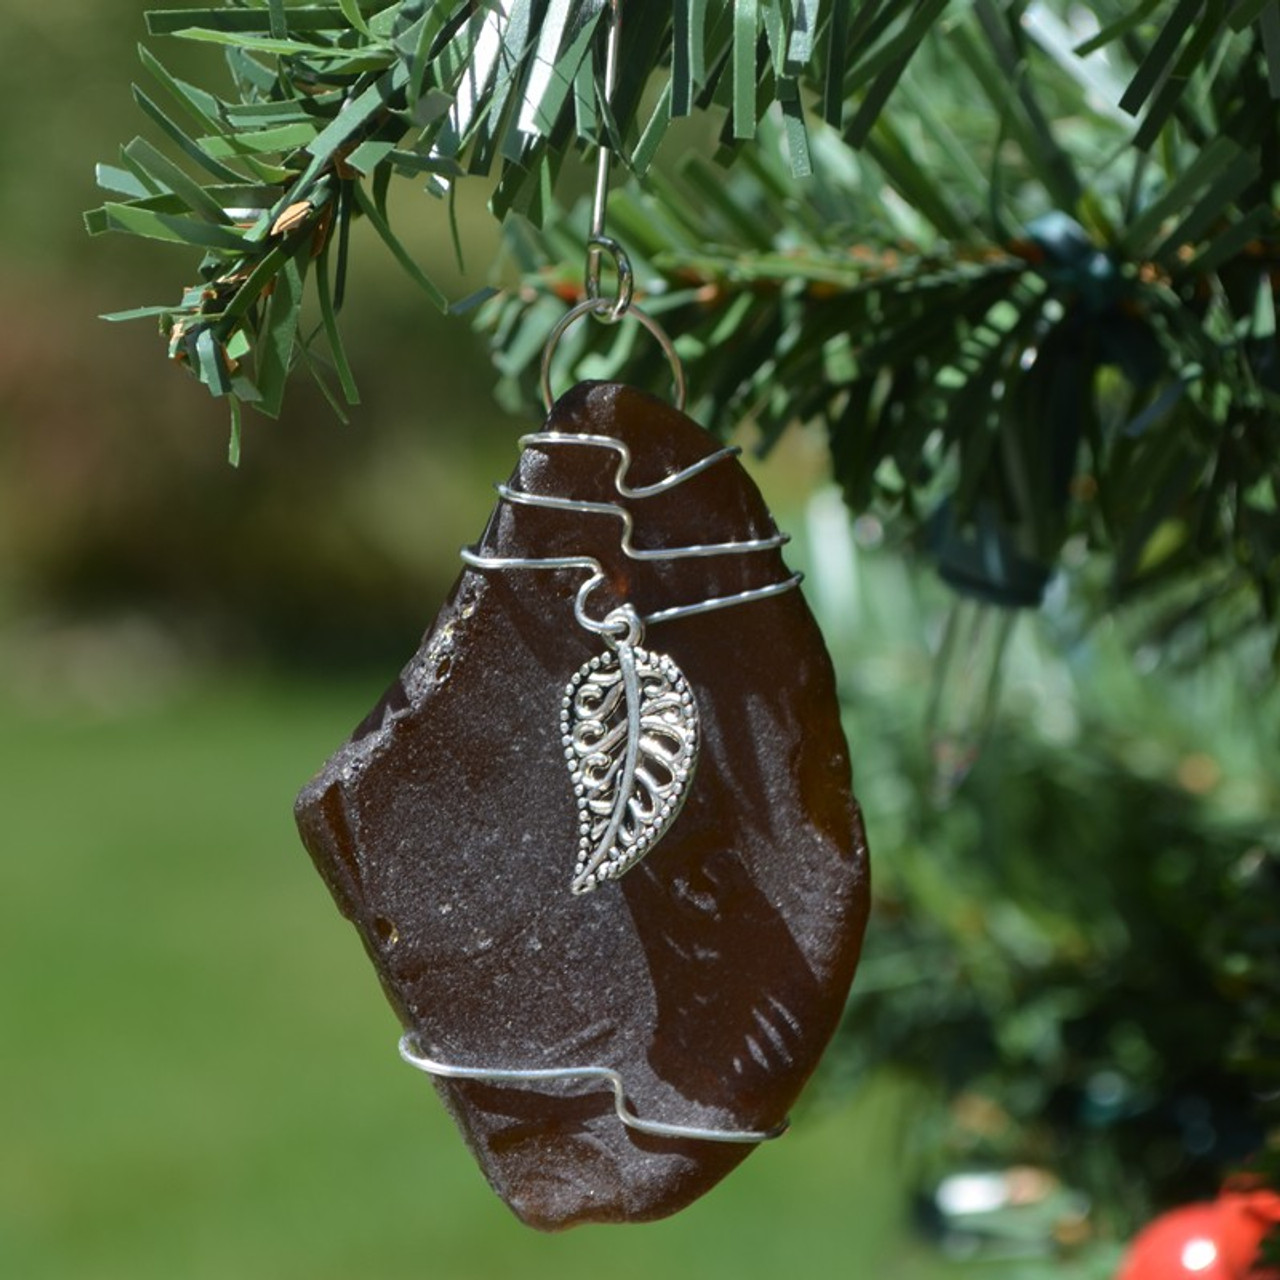 Silver Leaf Charm on a Surf Tumbled Sea Glass Ornament - Choose Your Color Sea Glass Frosted, Green, and Brown - Made to Order